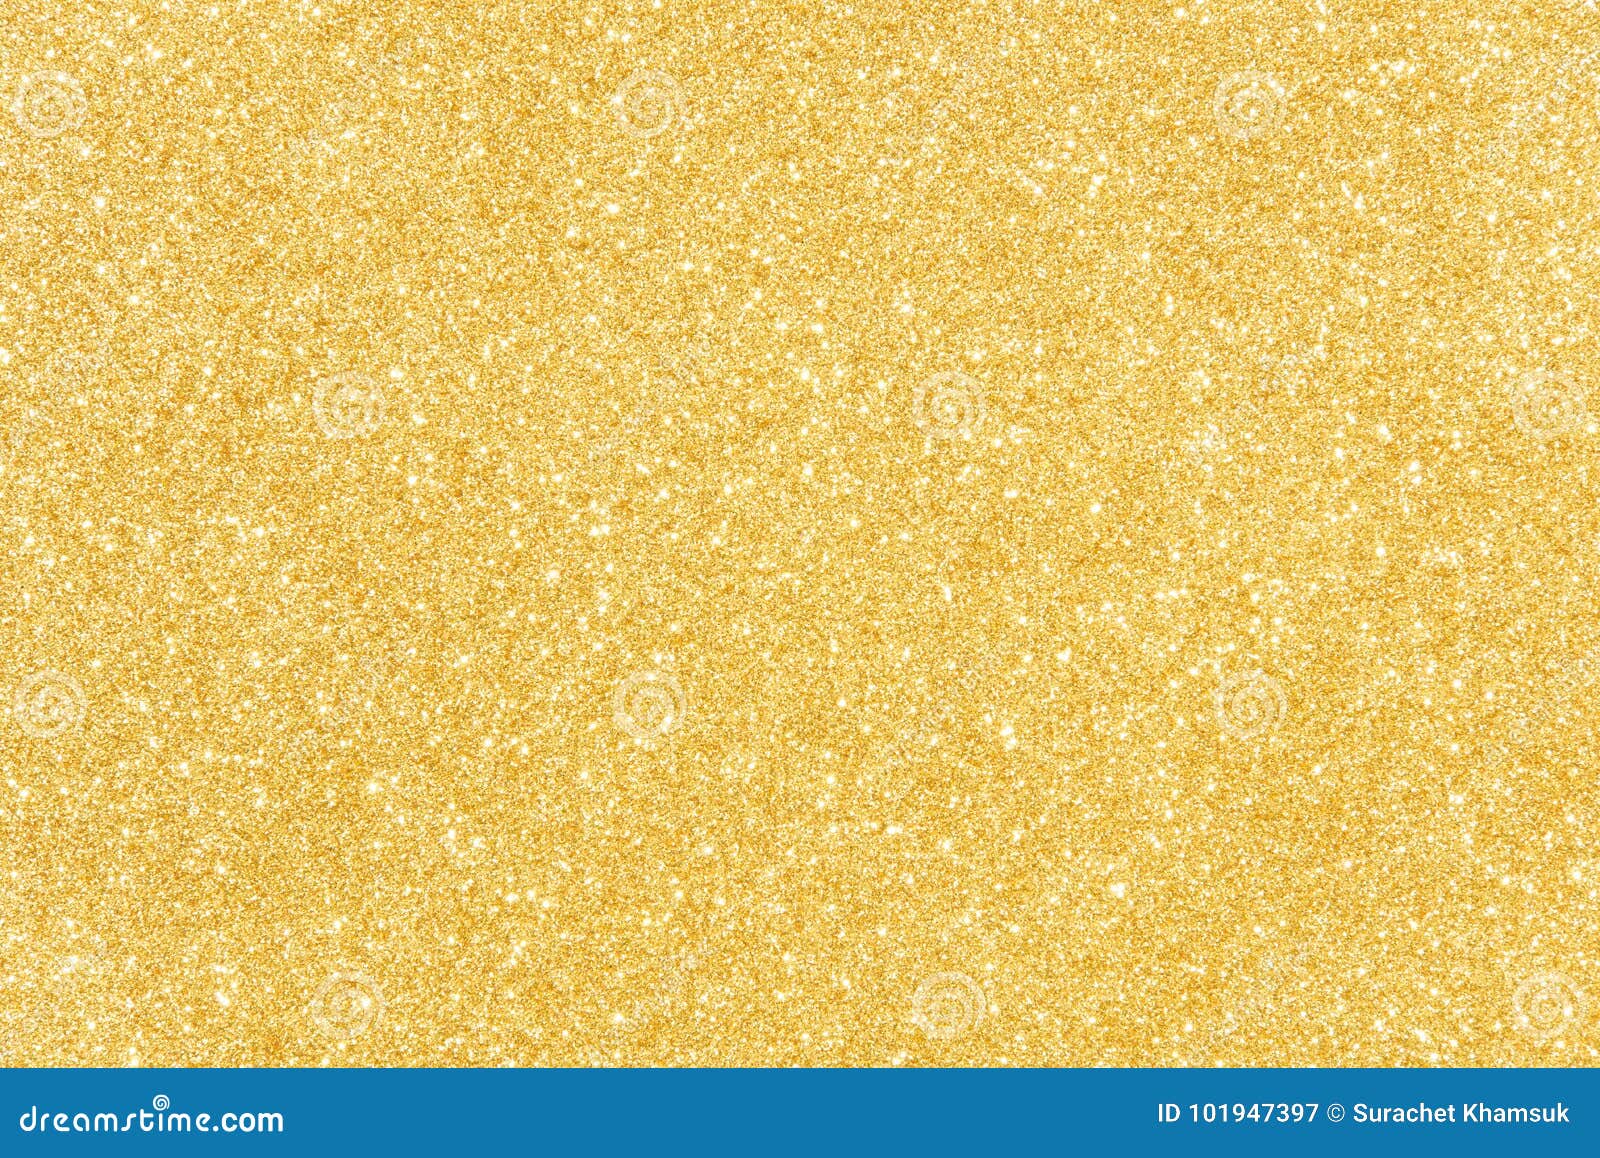 Download Gold Glitter Texture Abstract Background Stock Image Image of effect christmas